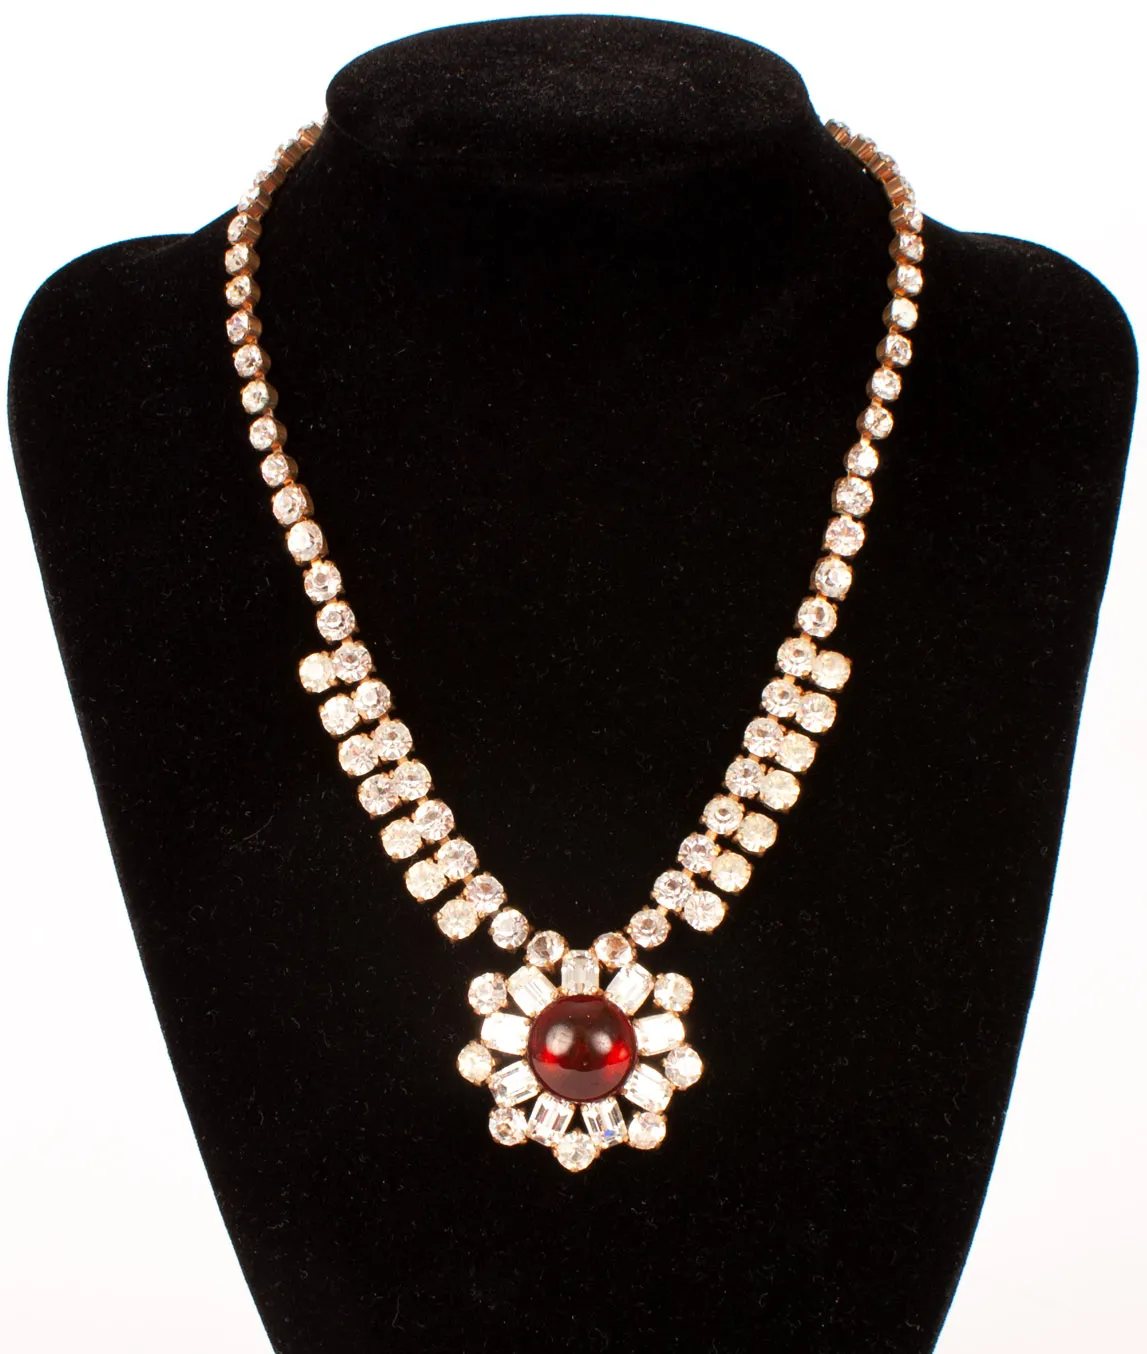 Ruby pendant and crystal mid-century Schoffel necklace